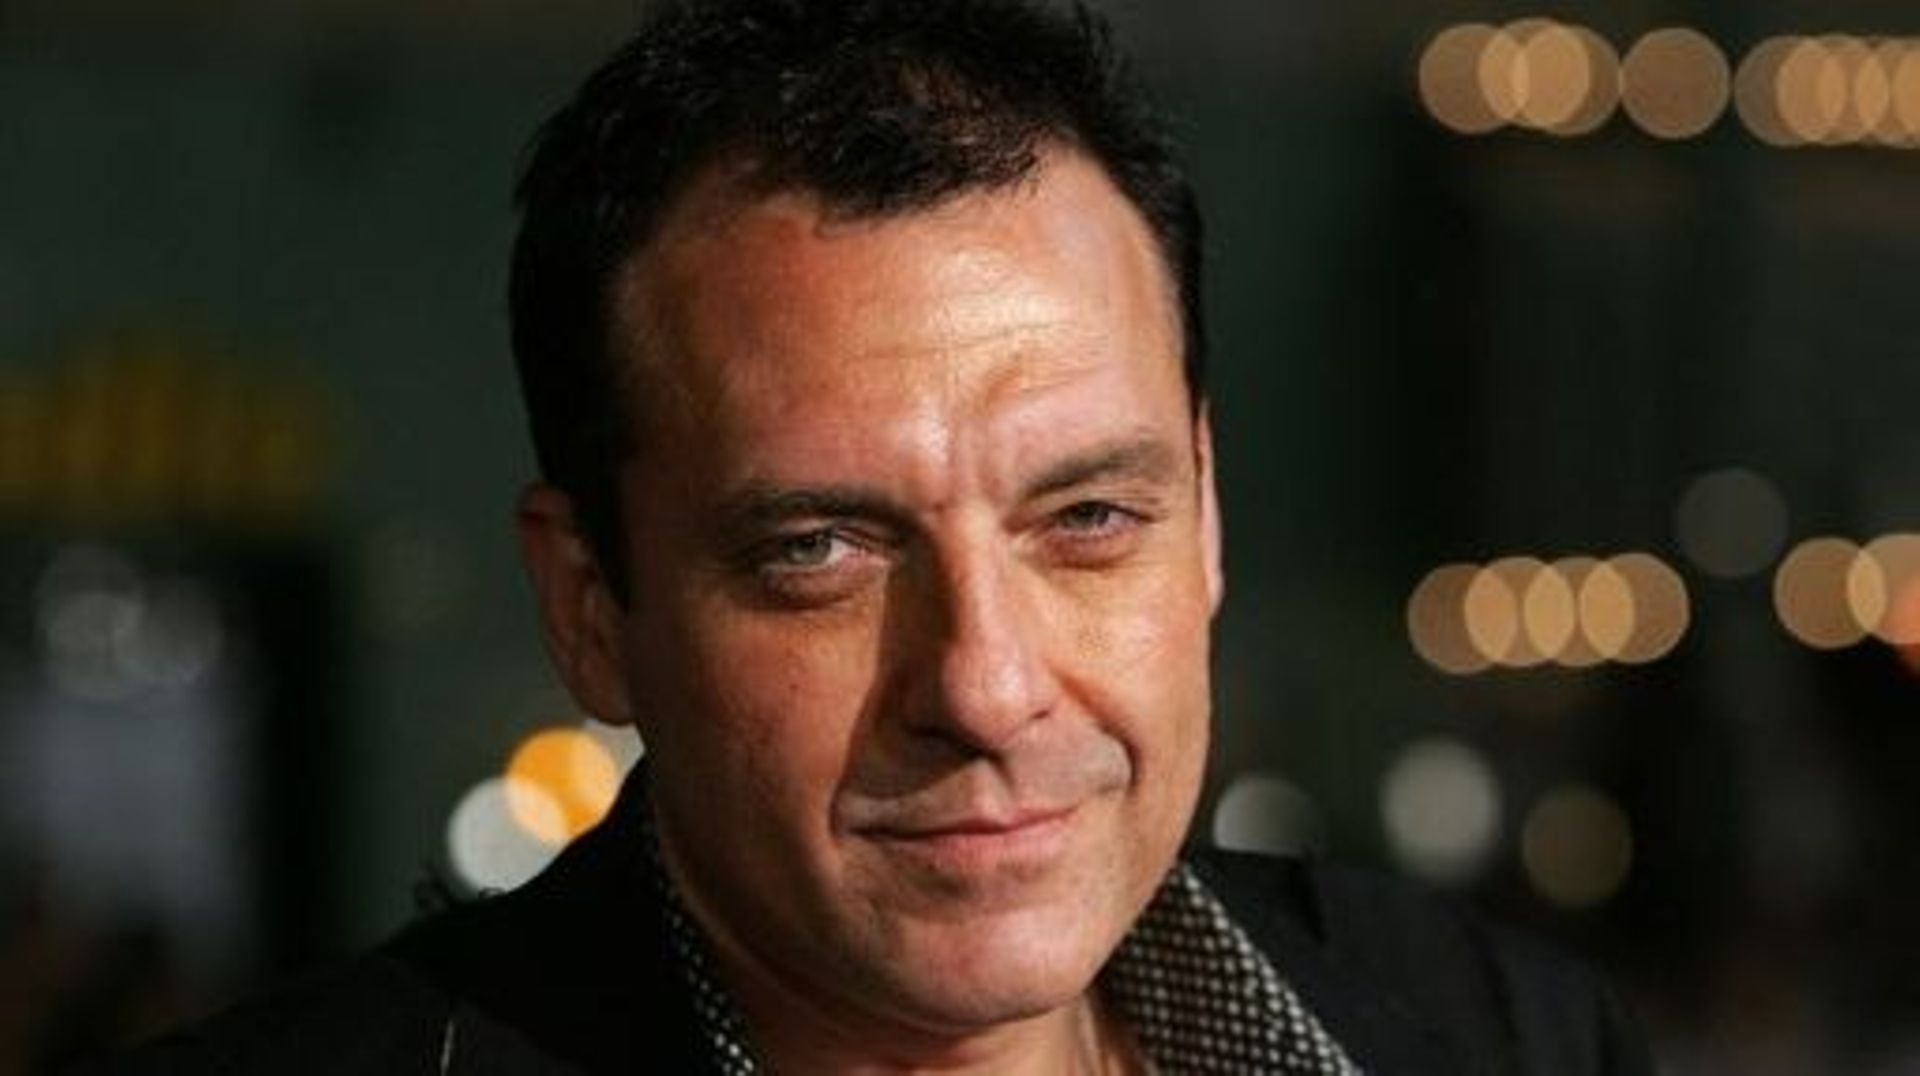 (FILES) In this file photo taken on May 5, 2007 actor Tom Sizemore arrives at the Paramount Vantage premiere of Babel at the FOX Westwood Village theatre in Westwood, California. Tom Sizemore, a talented but troubled actor who made a career of playing tou